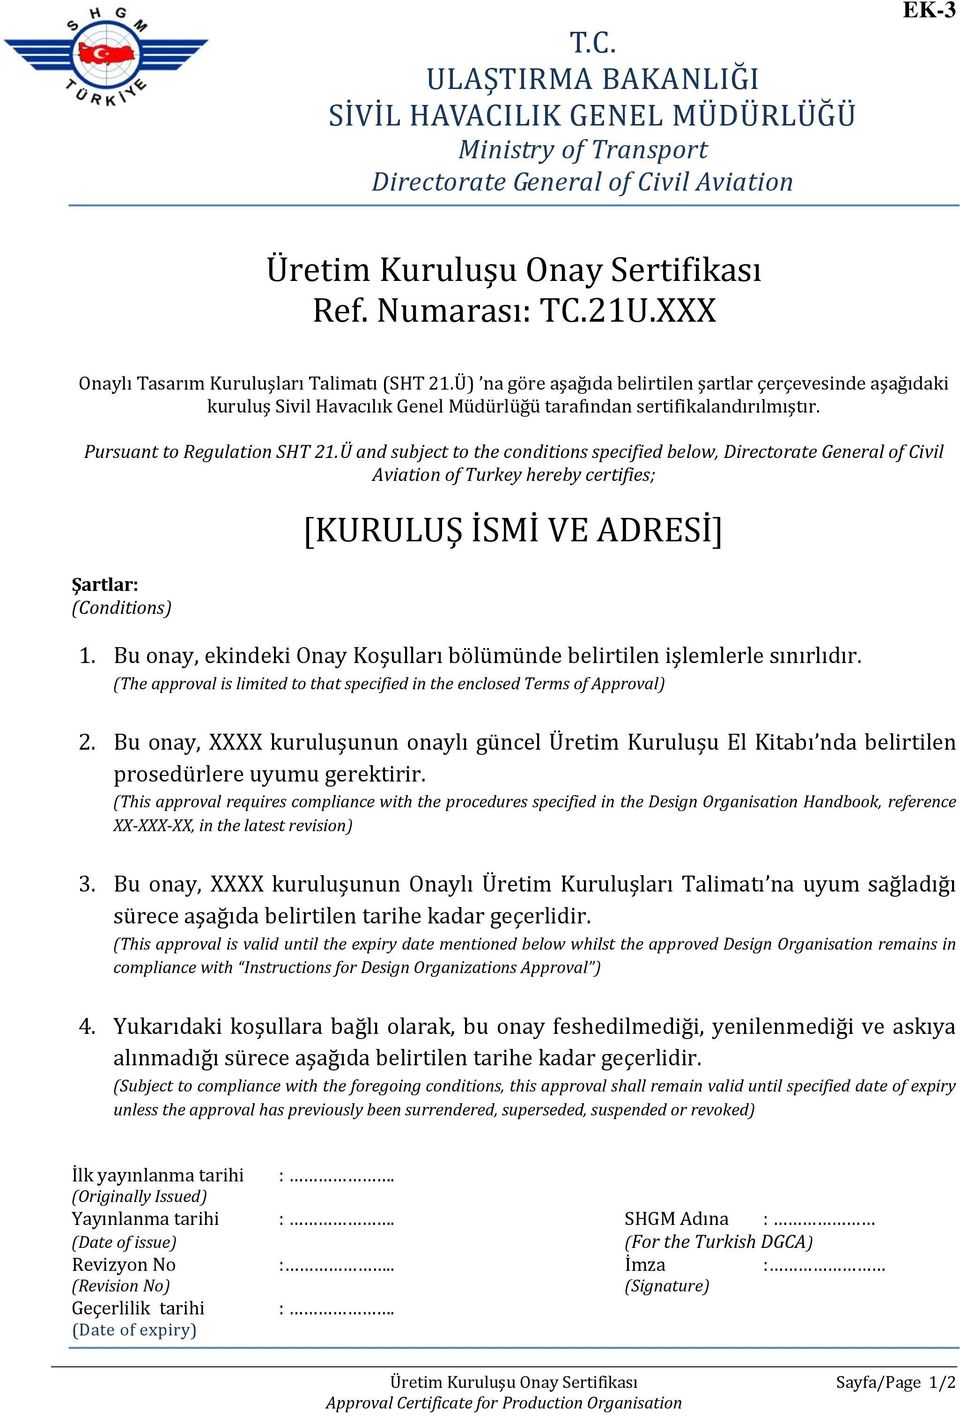 Pursuant to Regulation SHT 21.Ü and subject to the conditions specified below, Directorate General of Civil Aviation of Turkey hereby certifies; Şartlar: (Conditions) [KURULUŞ İSMİ VE ADRESİ] 1.